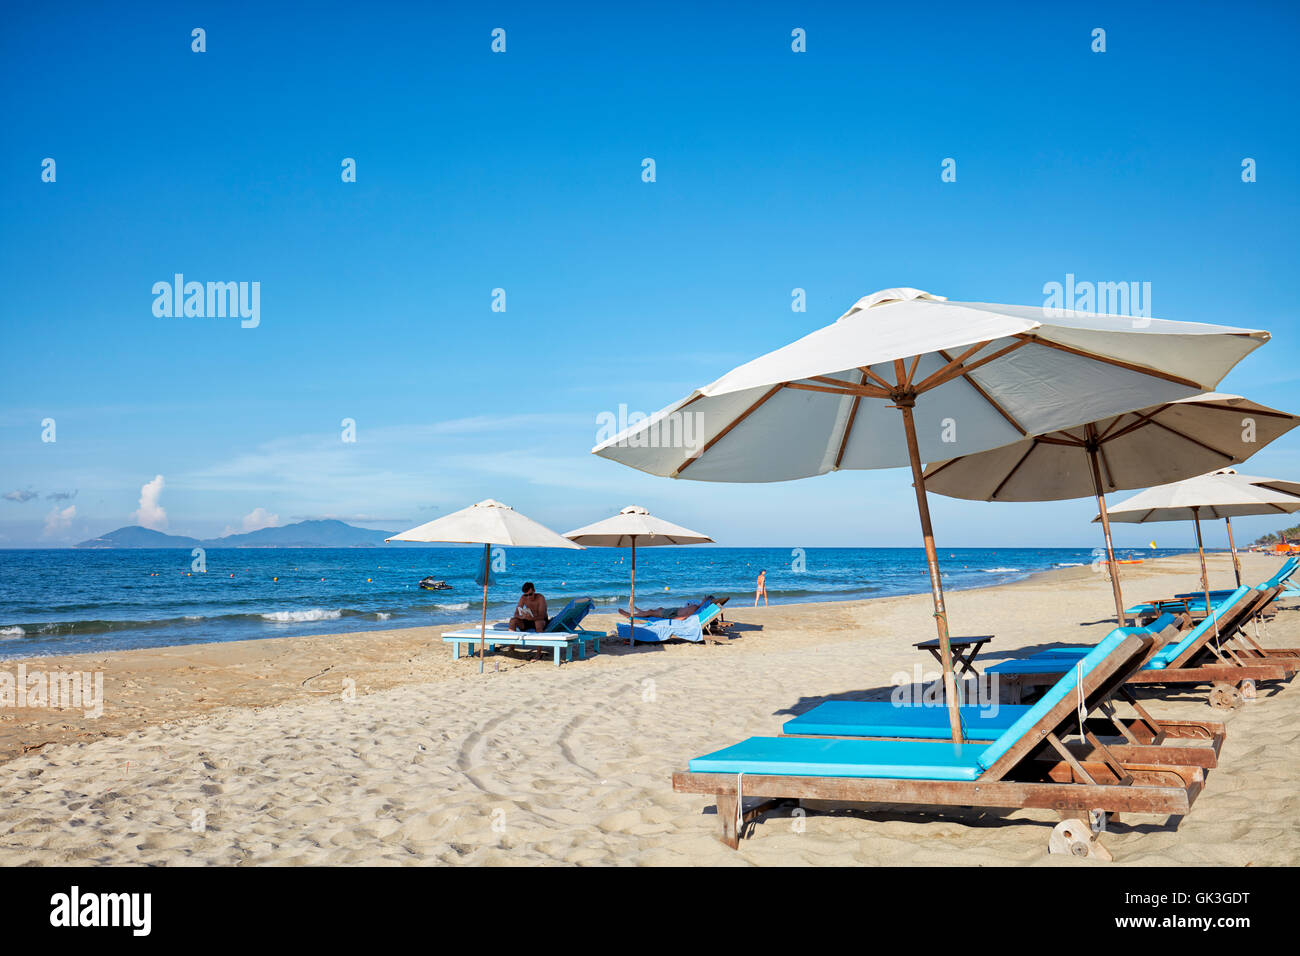 Lounge chairs and parasols on Cua Dai Beach. Hoi An, Quang Nam Province, Vietnam. Stock Photo